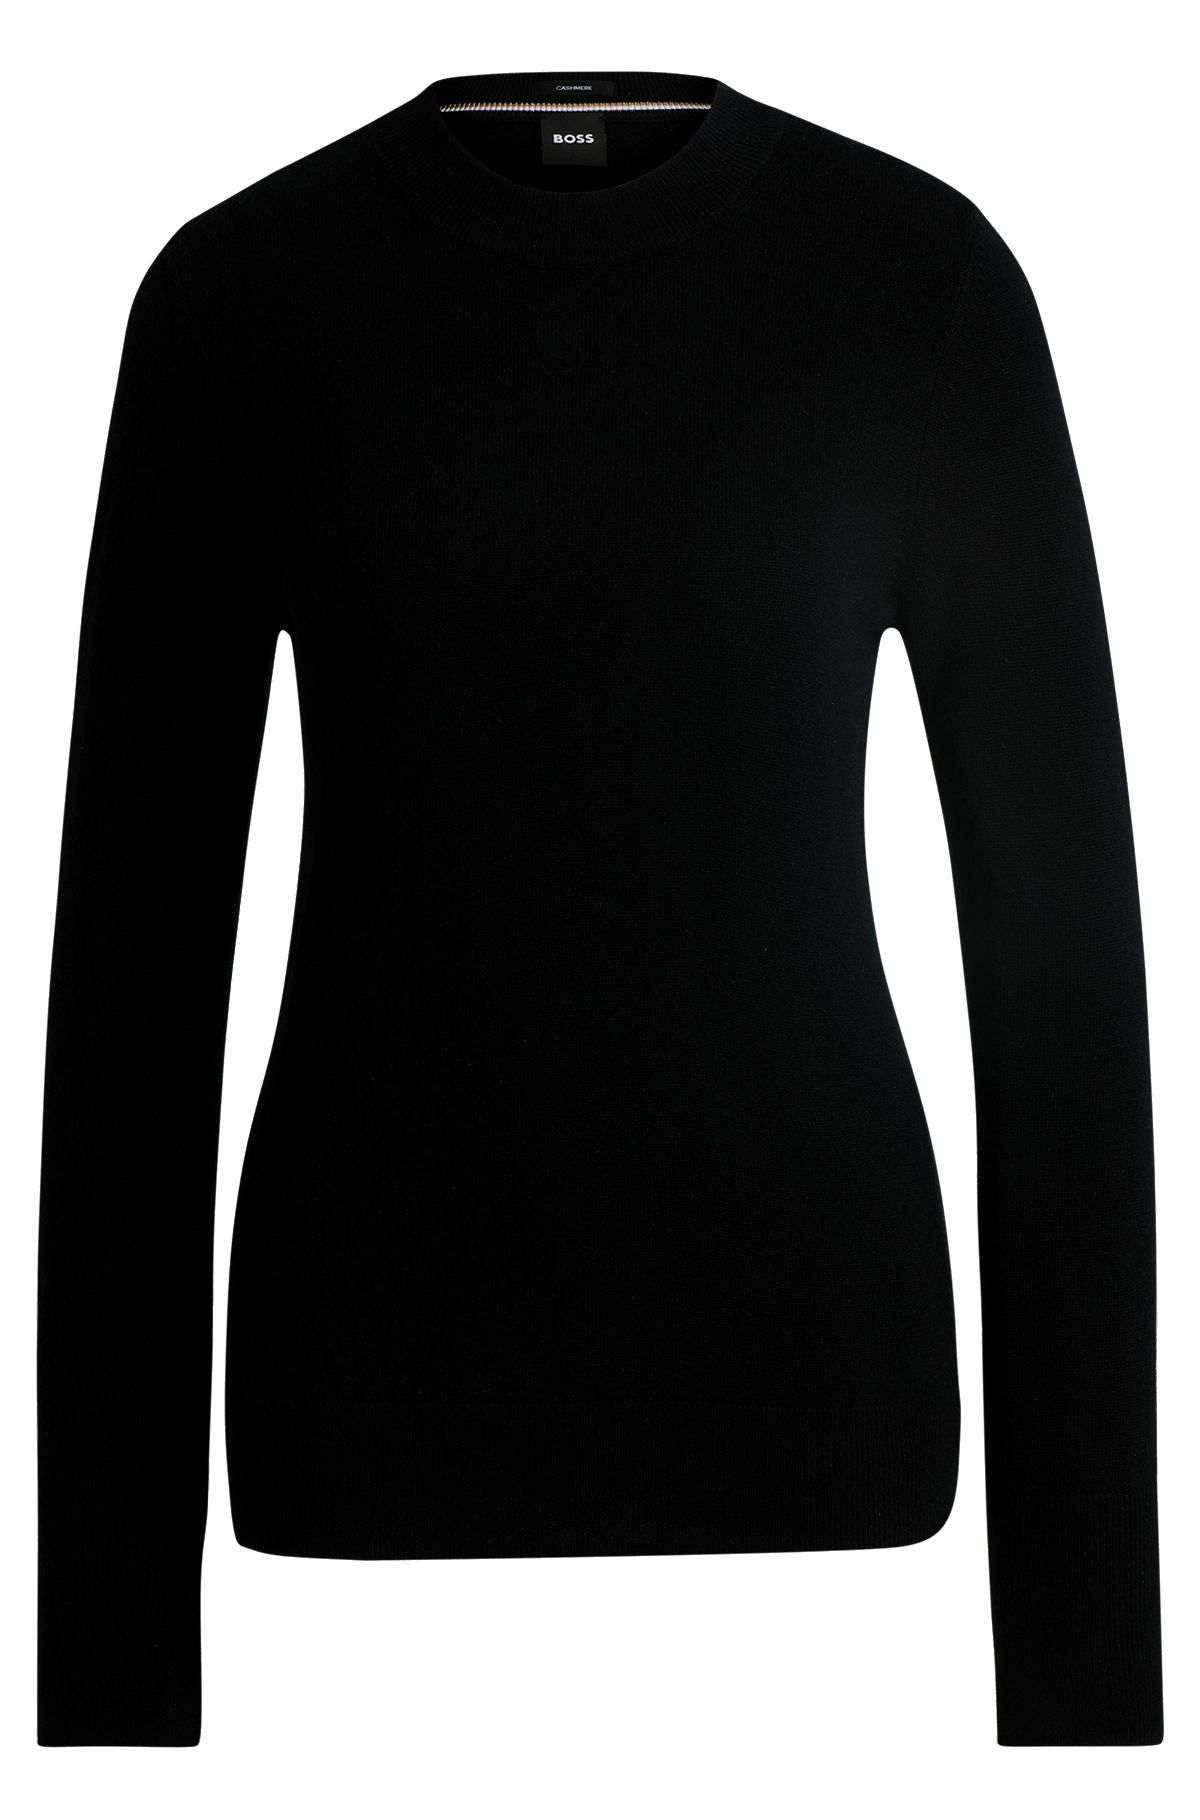 Regular-fit sweater in luxurious cashmere, Black